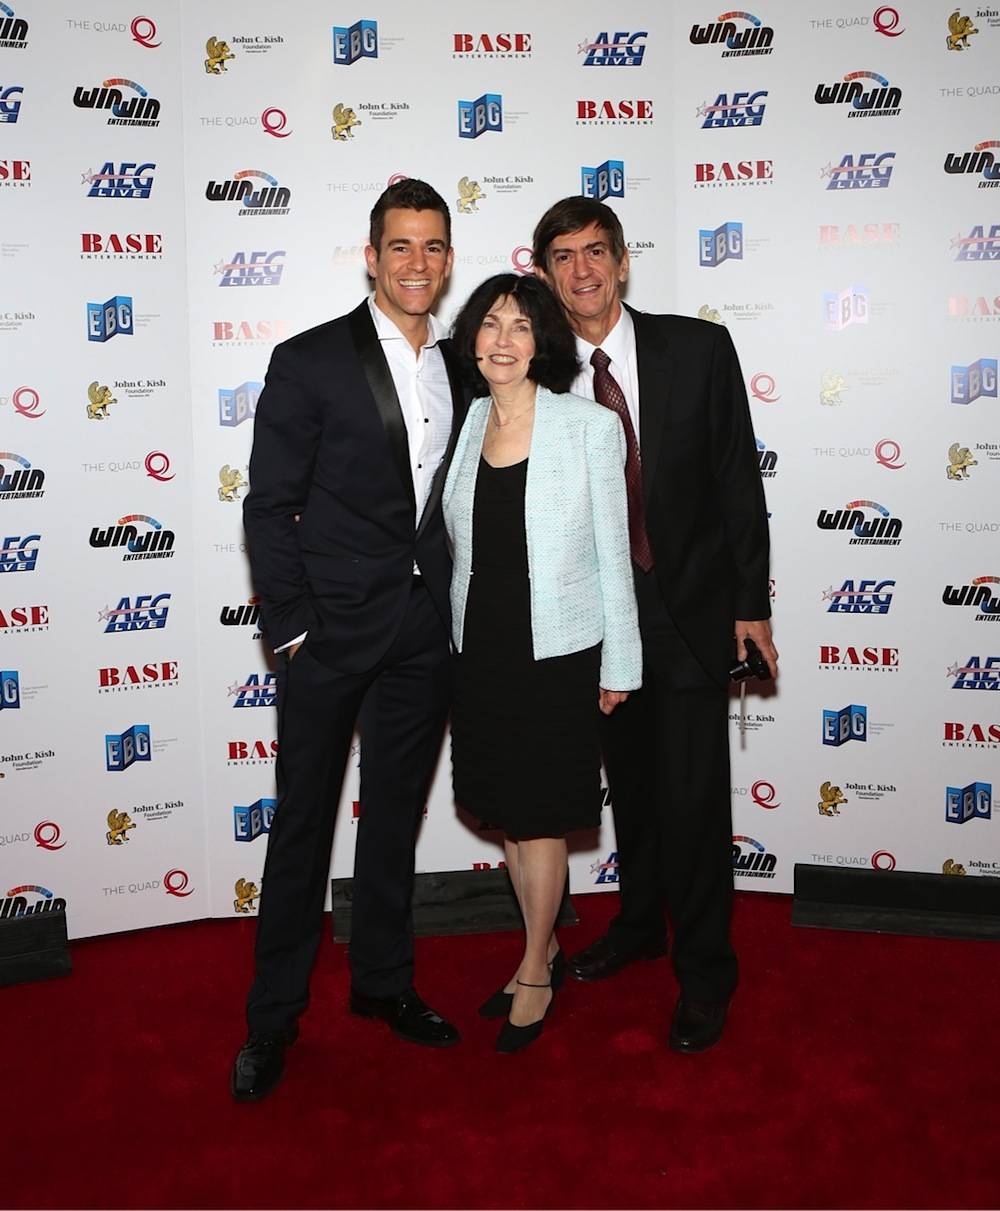 The Quad headliner and founder of Win-Win Entertainment Jeff Civillico and his parents walk the red carpet during the “Headliners Bash” at The Quad on Friday. Photos: Gabe Ginsberg 